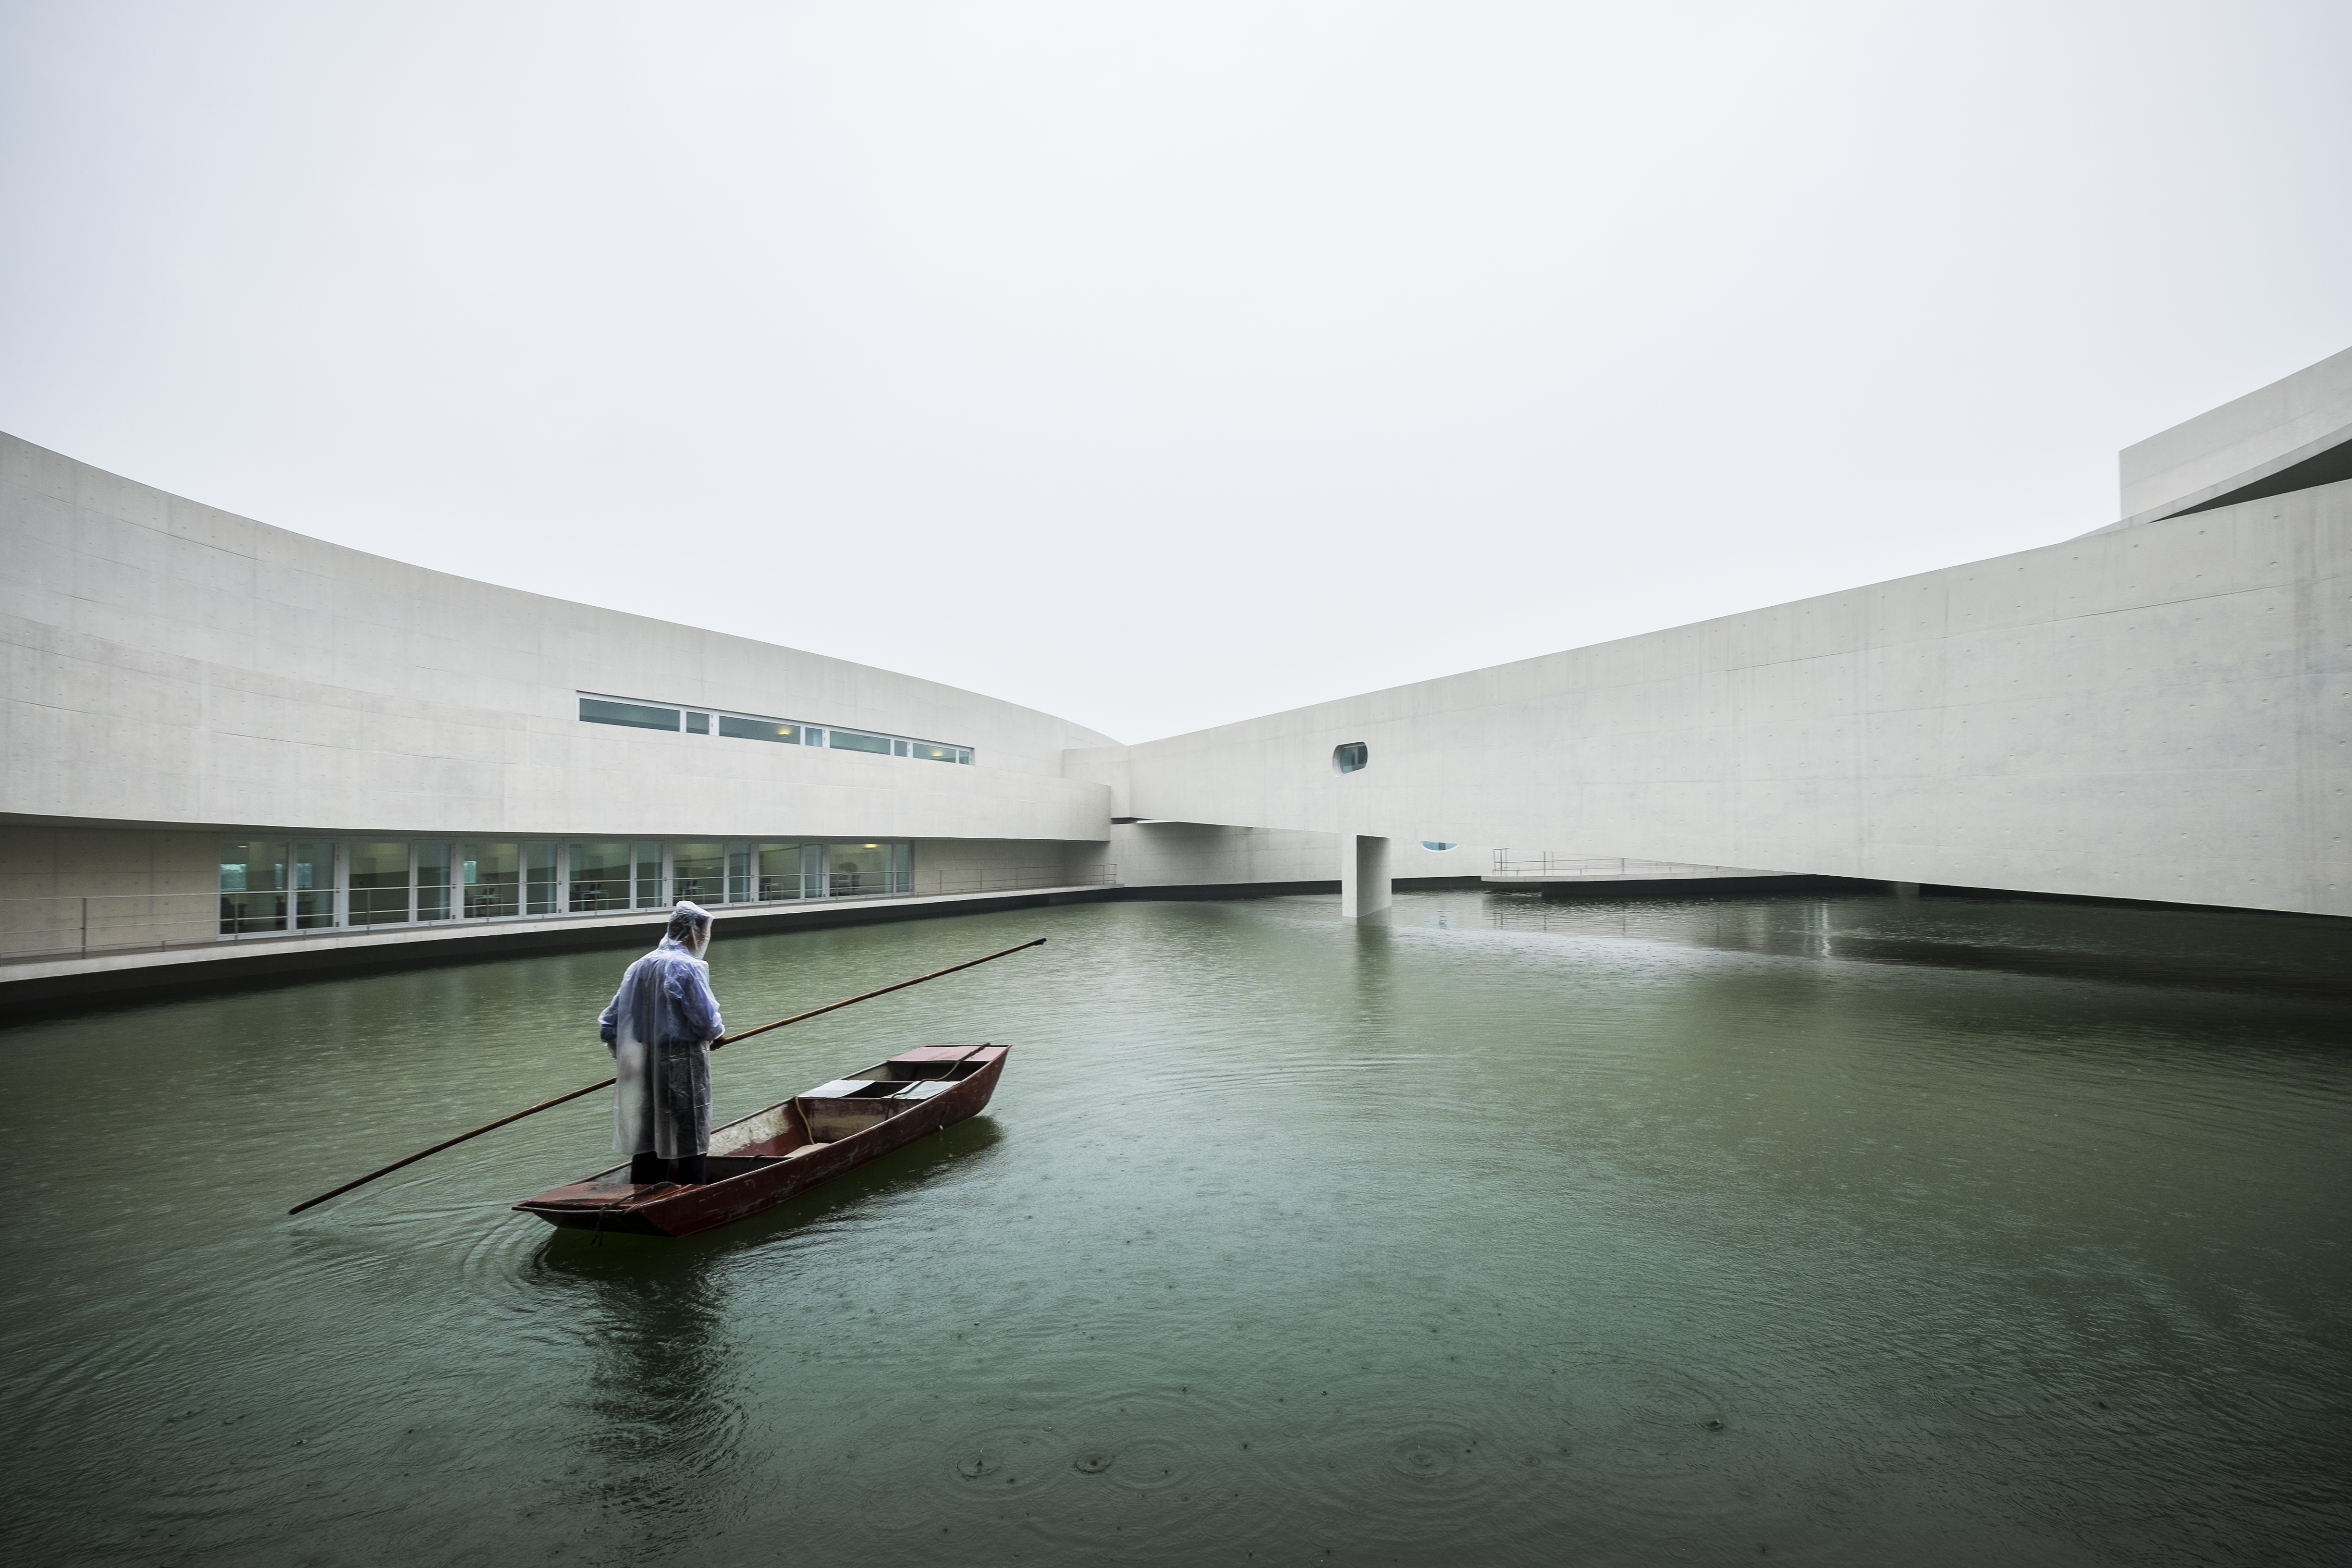 Project name: Shihlien Chemical Industrial Park Office Architect: Álvaro Siza + Carlos CastanheiraLocation: Jiangsu, ChinaDate: July 2014PAYPAL reference: 2HB90218MU541123C